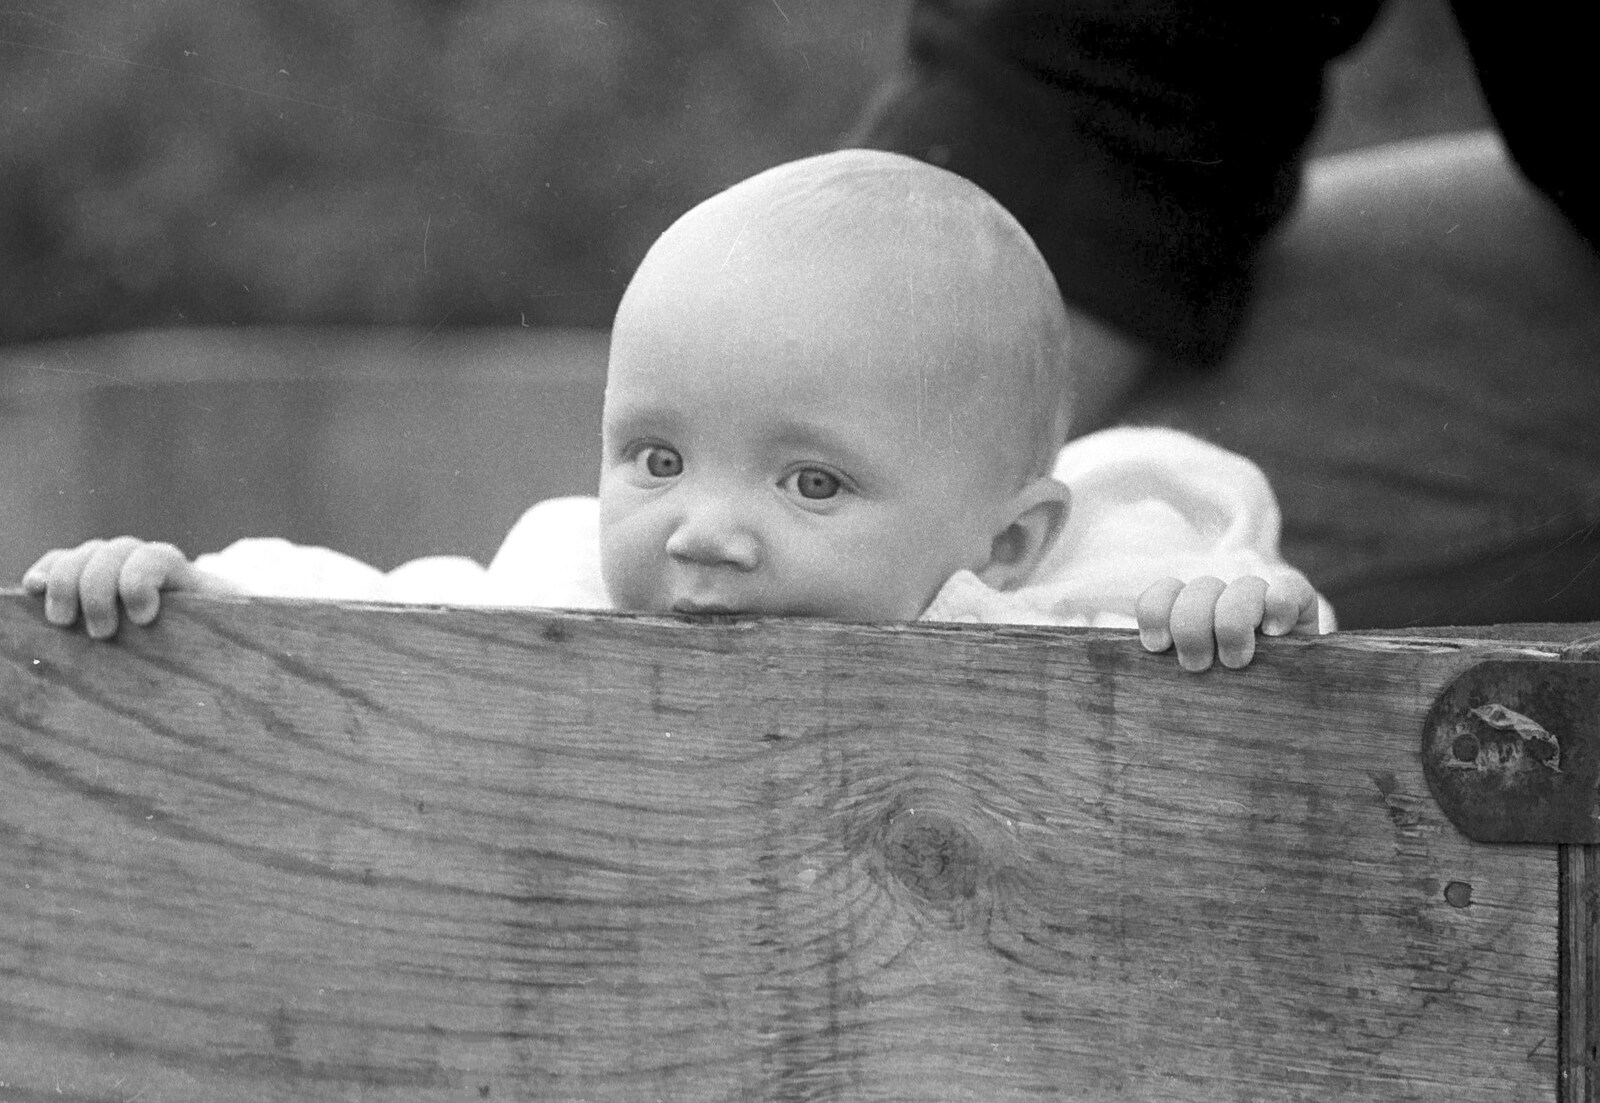 Monique's baby chews on a box from Cider Making in Black and White, Stuston, Suffolk - 11th October 1992